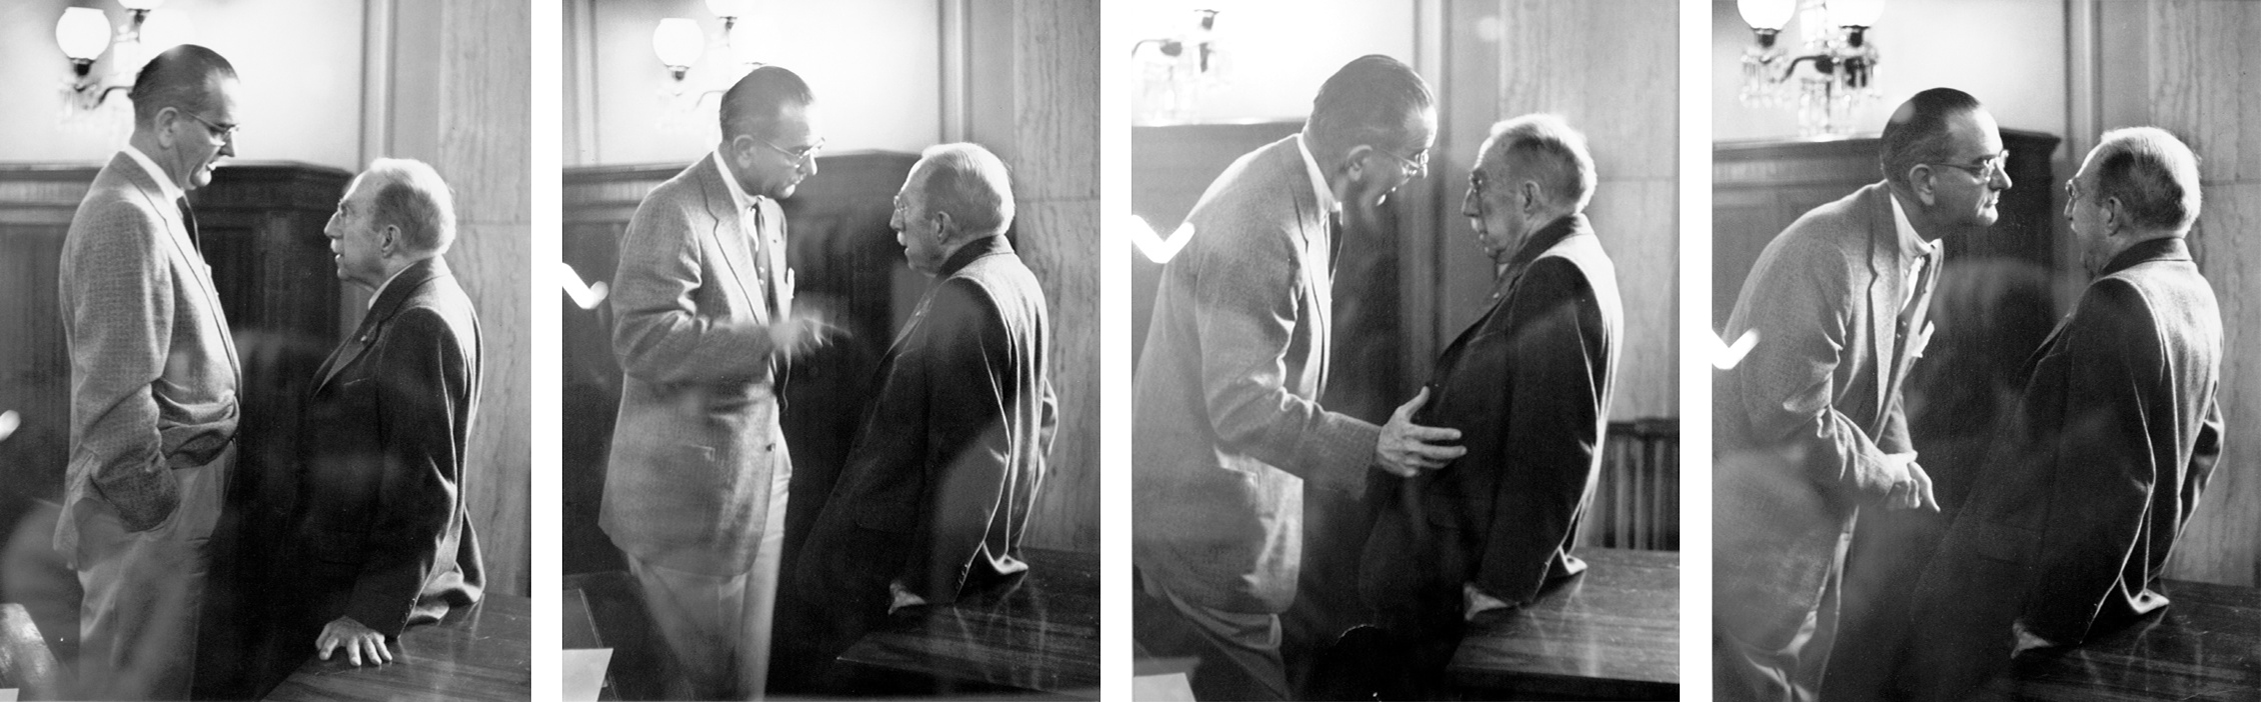 Lyndon B. Johnson, left, the Senate majority leader, is shown working over Theodore F. Green, D-R.I., chairman of the Senate Foreign Relations Committee in 1957. Photograph: George Tames/The New York Times.